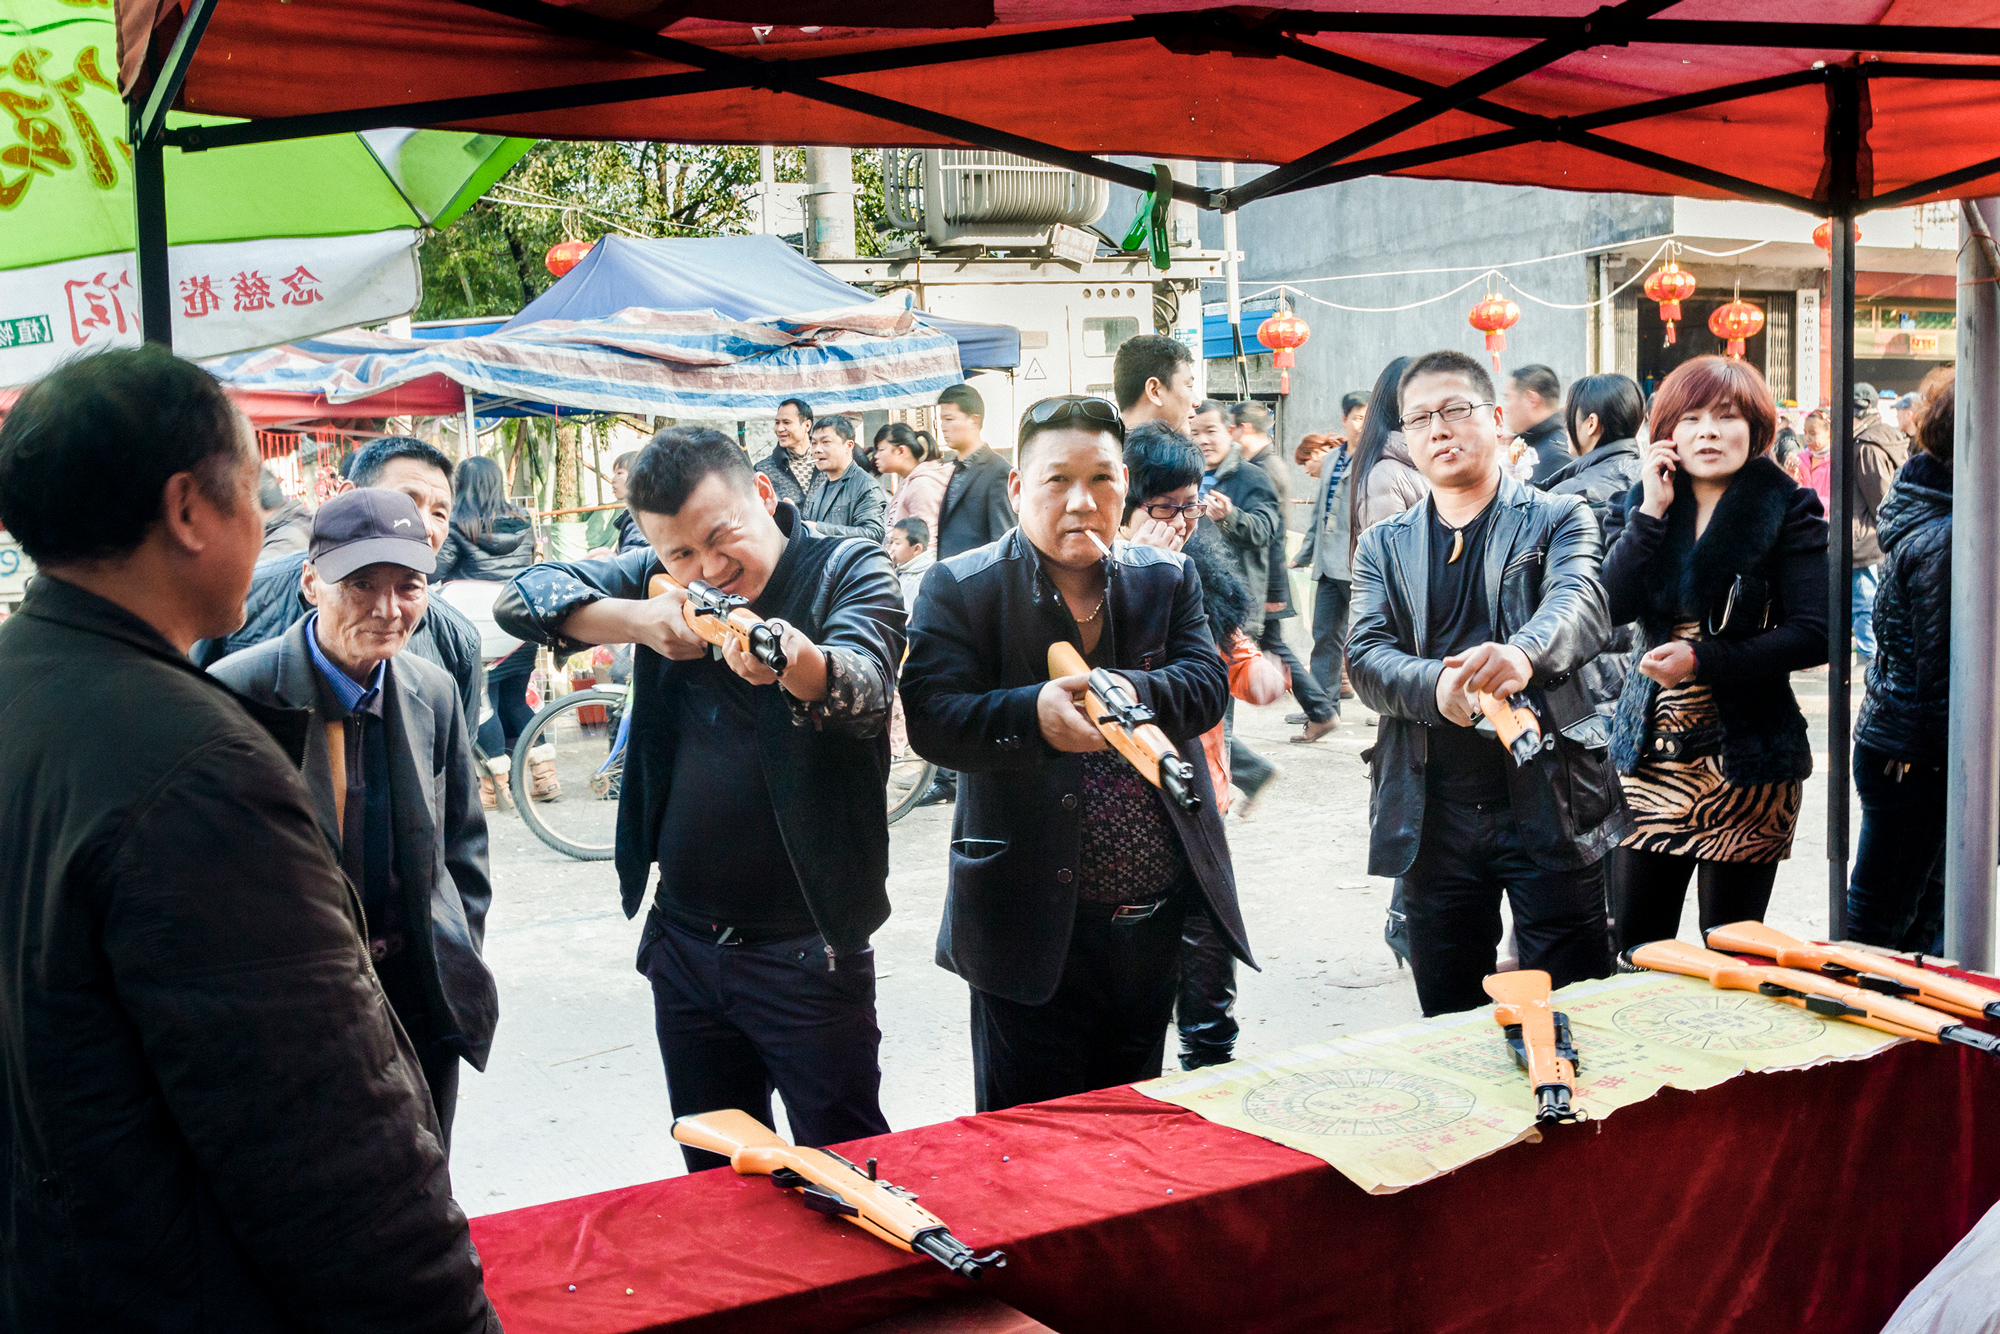 People play with air guns at a Lantern Festival celebration in Ancao village, February 6, 2012.